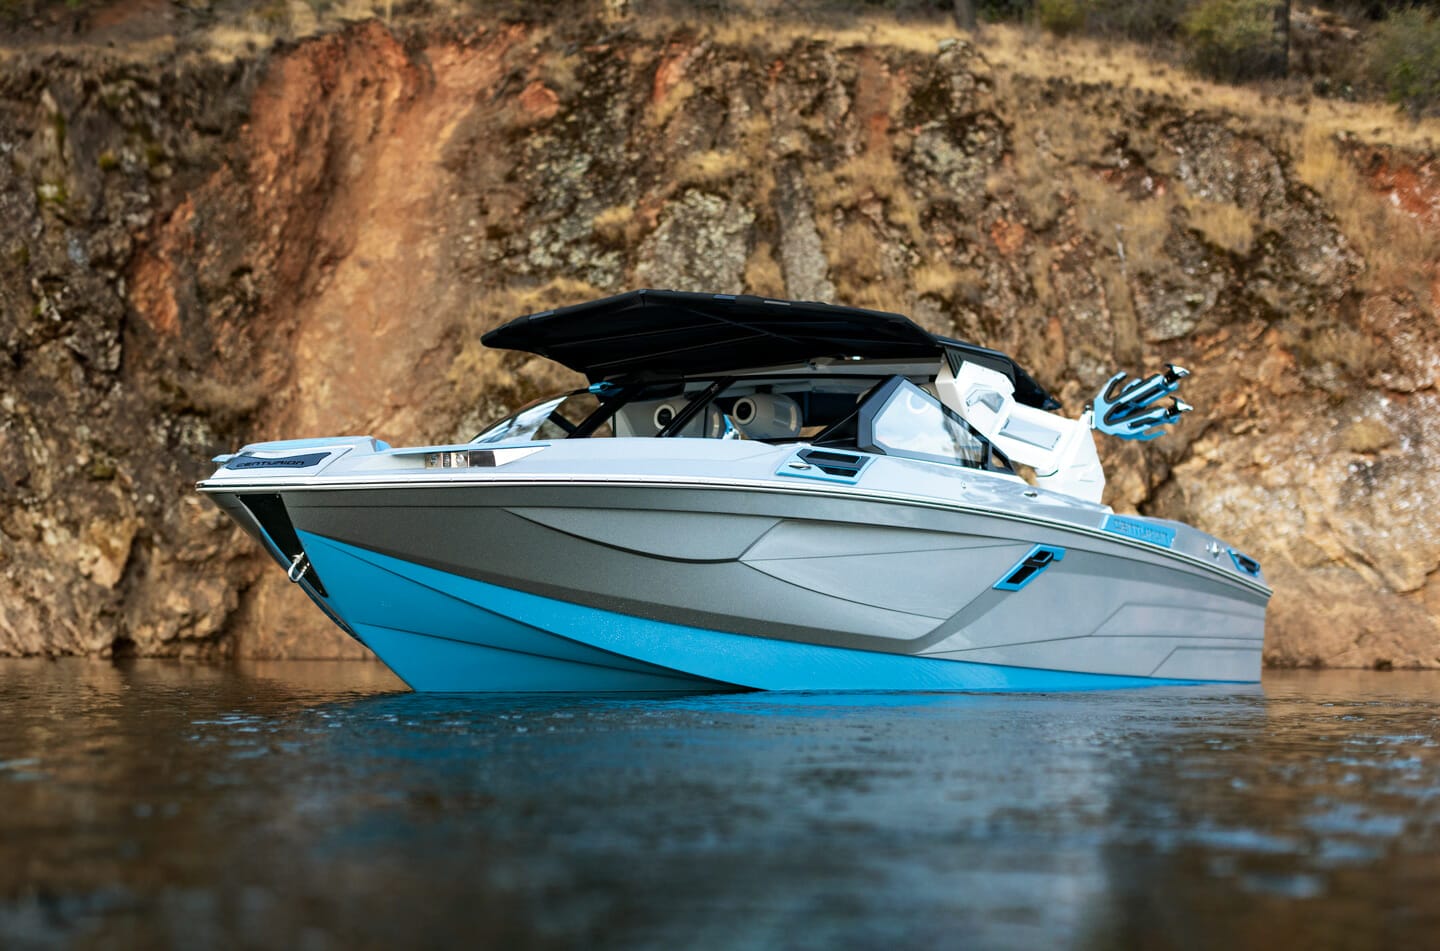 A blue and white wakesurf boat on a body of water.